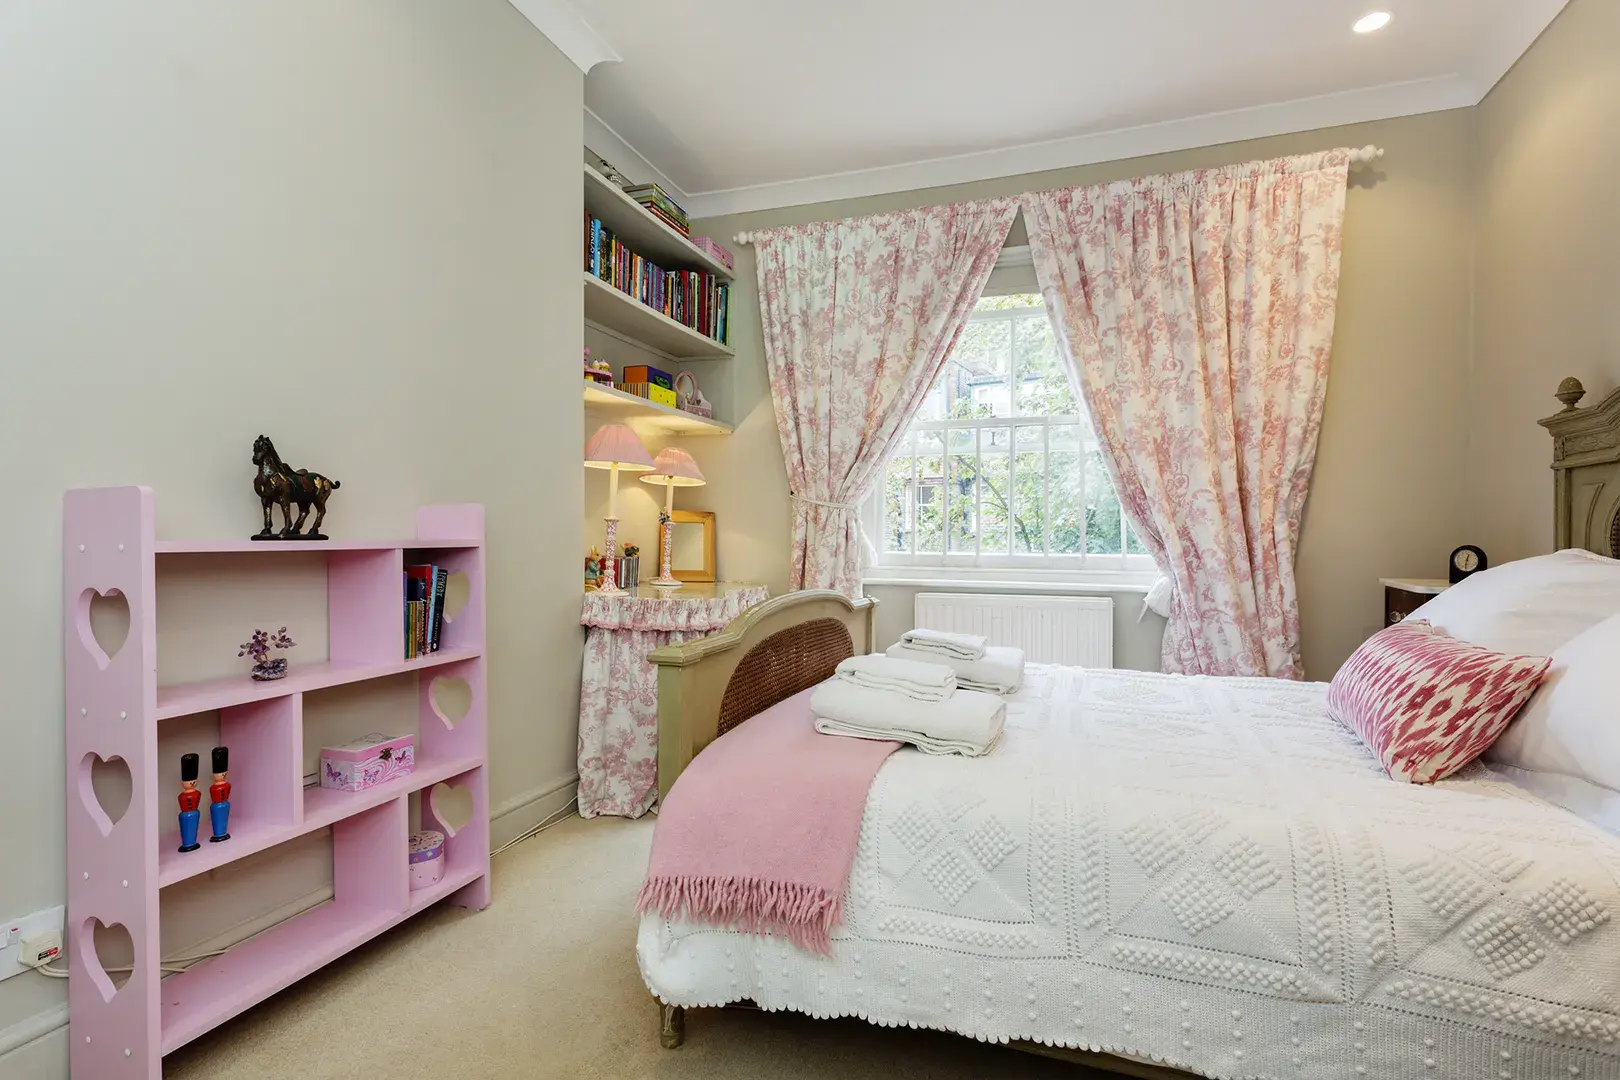 Haarlem Road, holiday home in Hammersmith, London